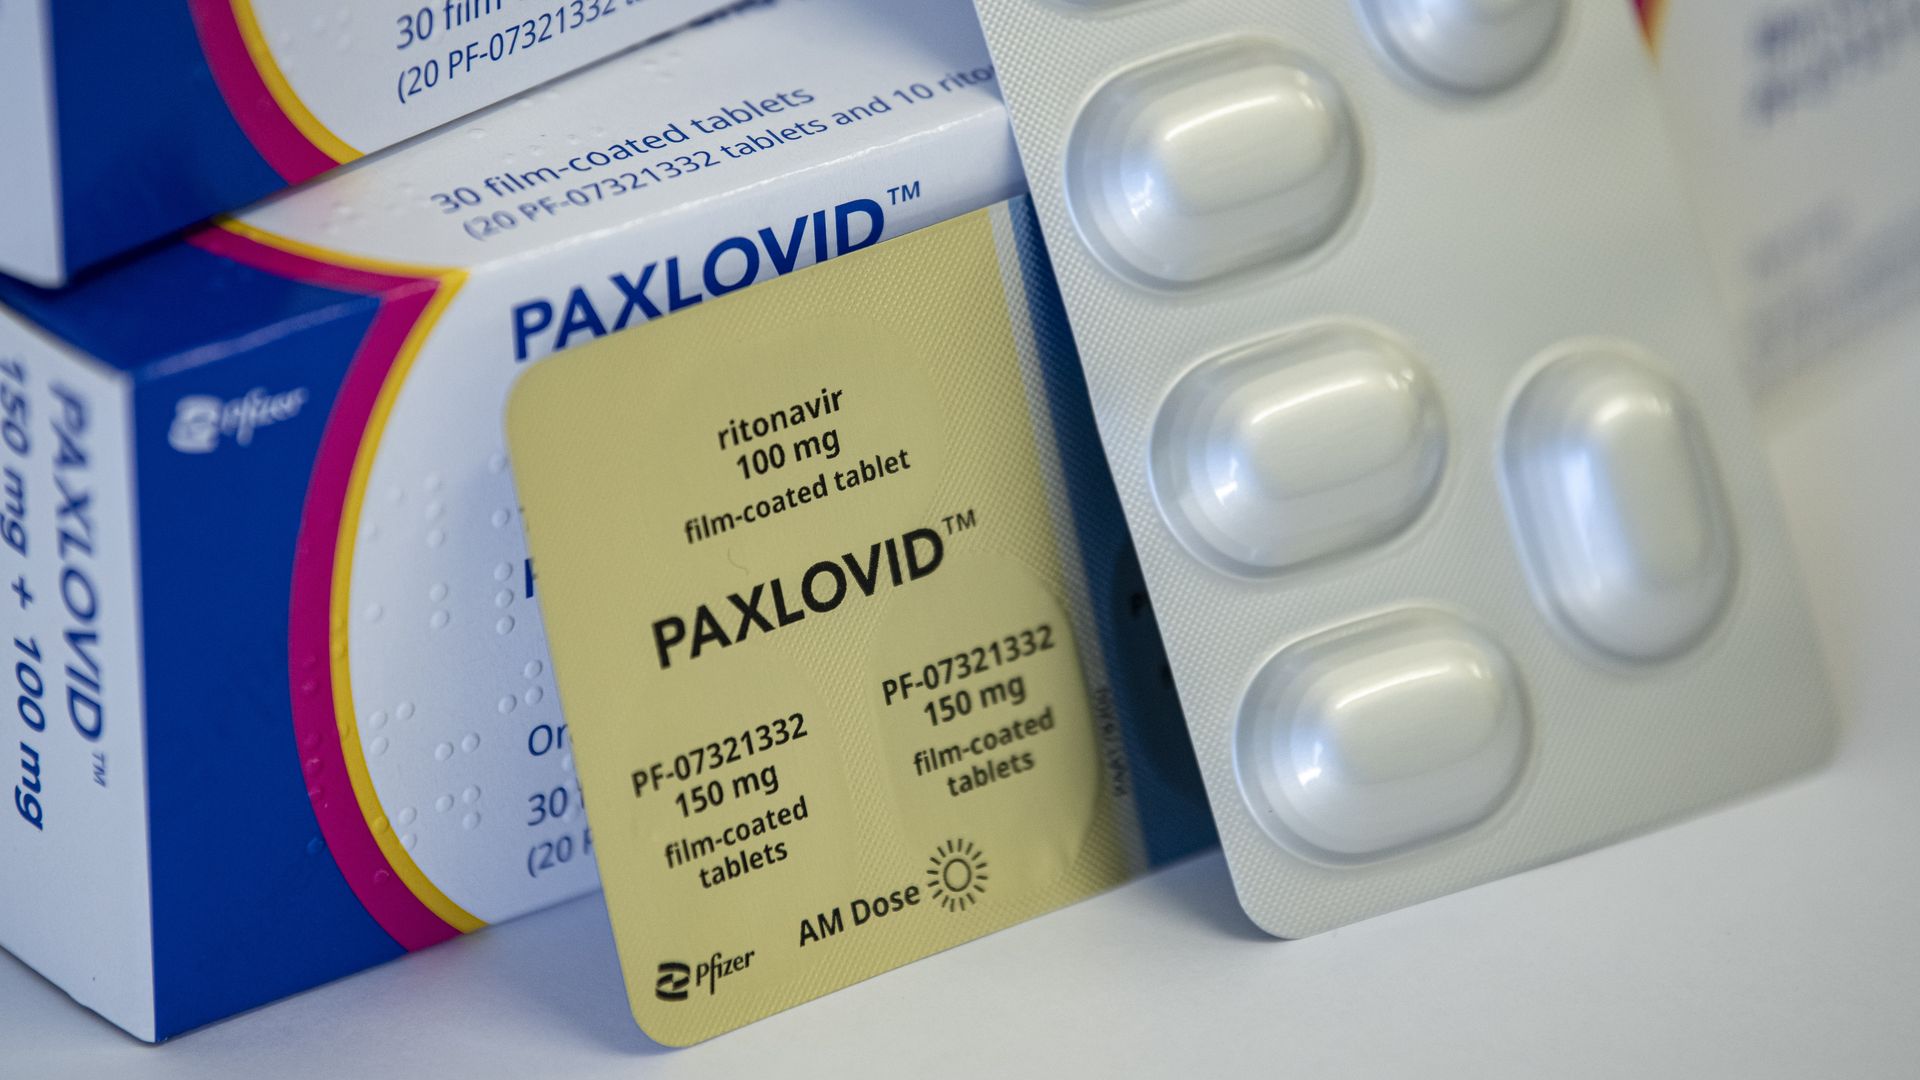 Boxes of Paxlovid lie on a table.